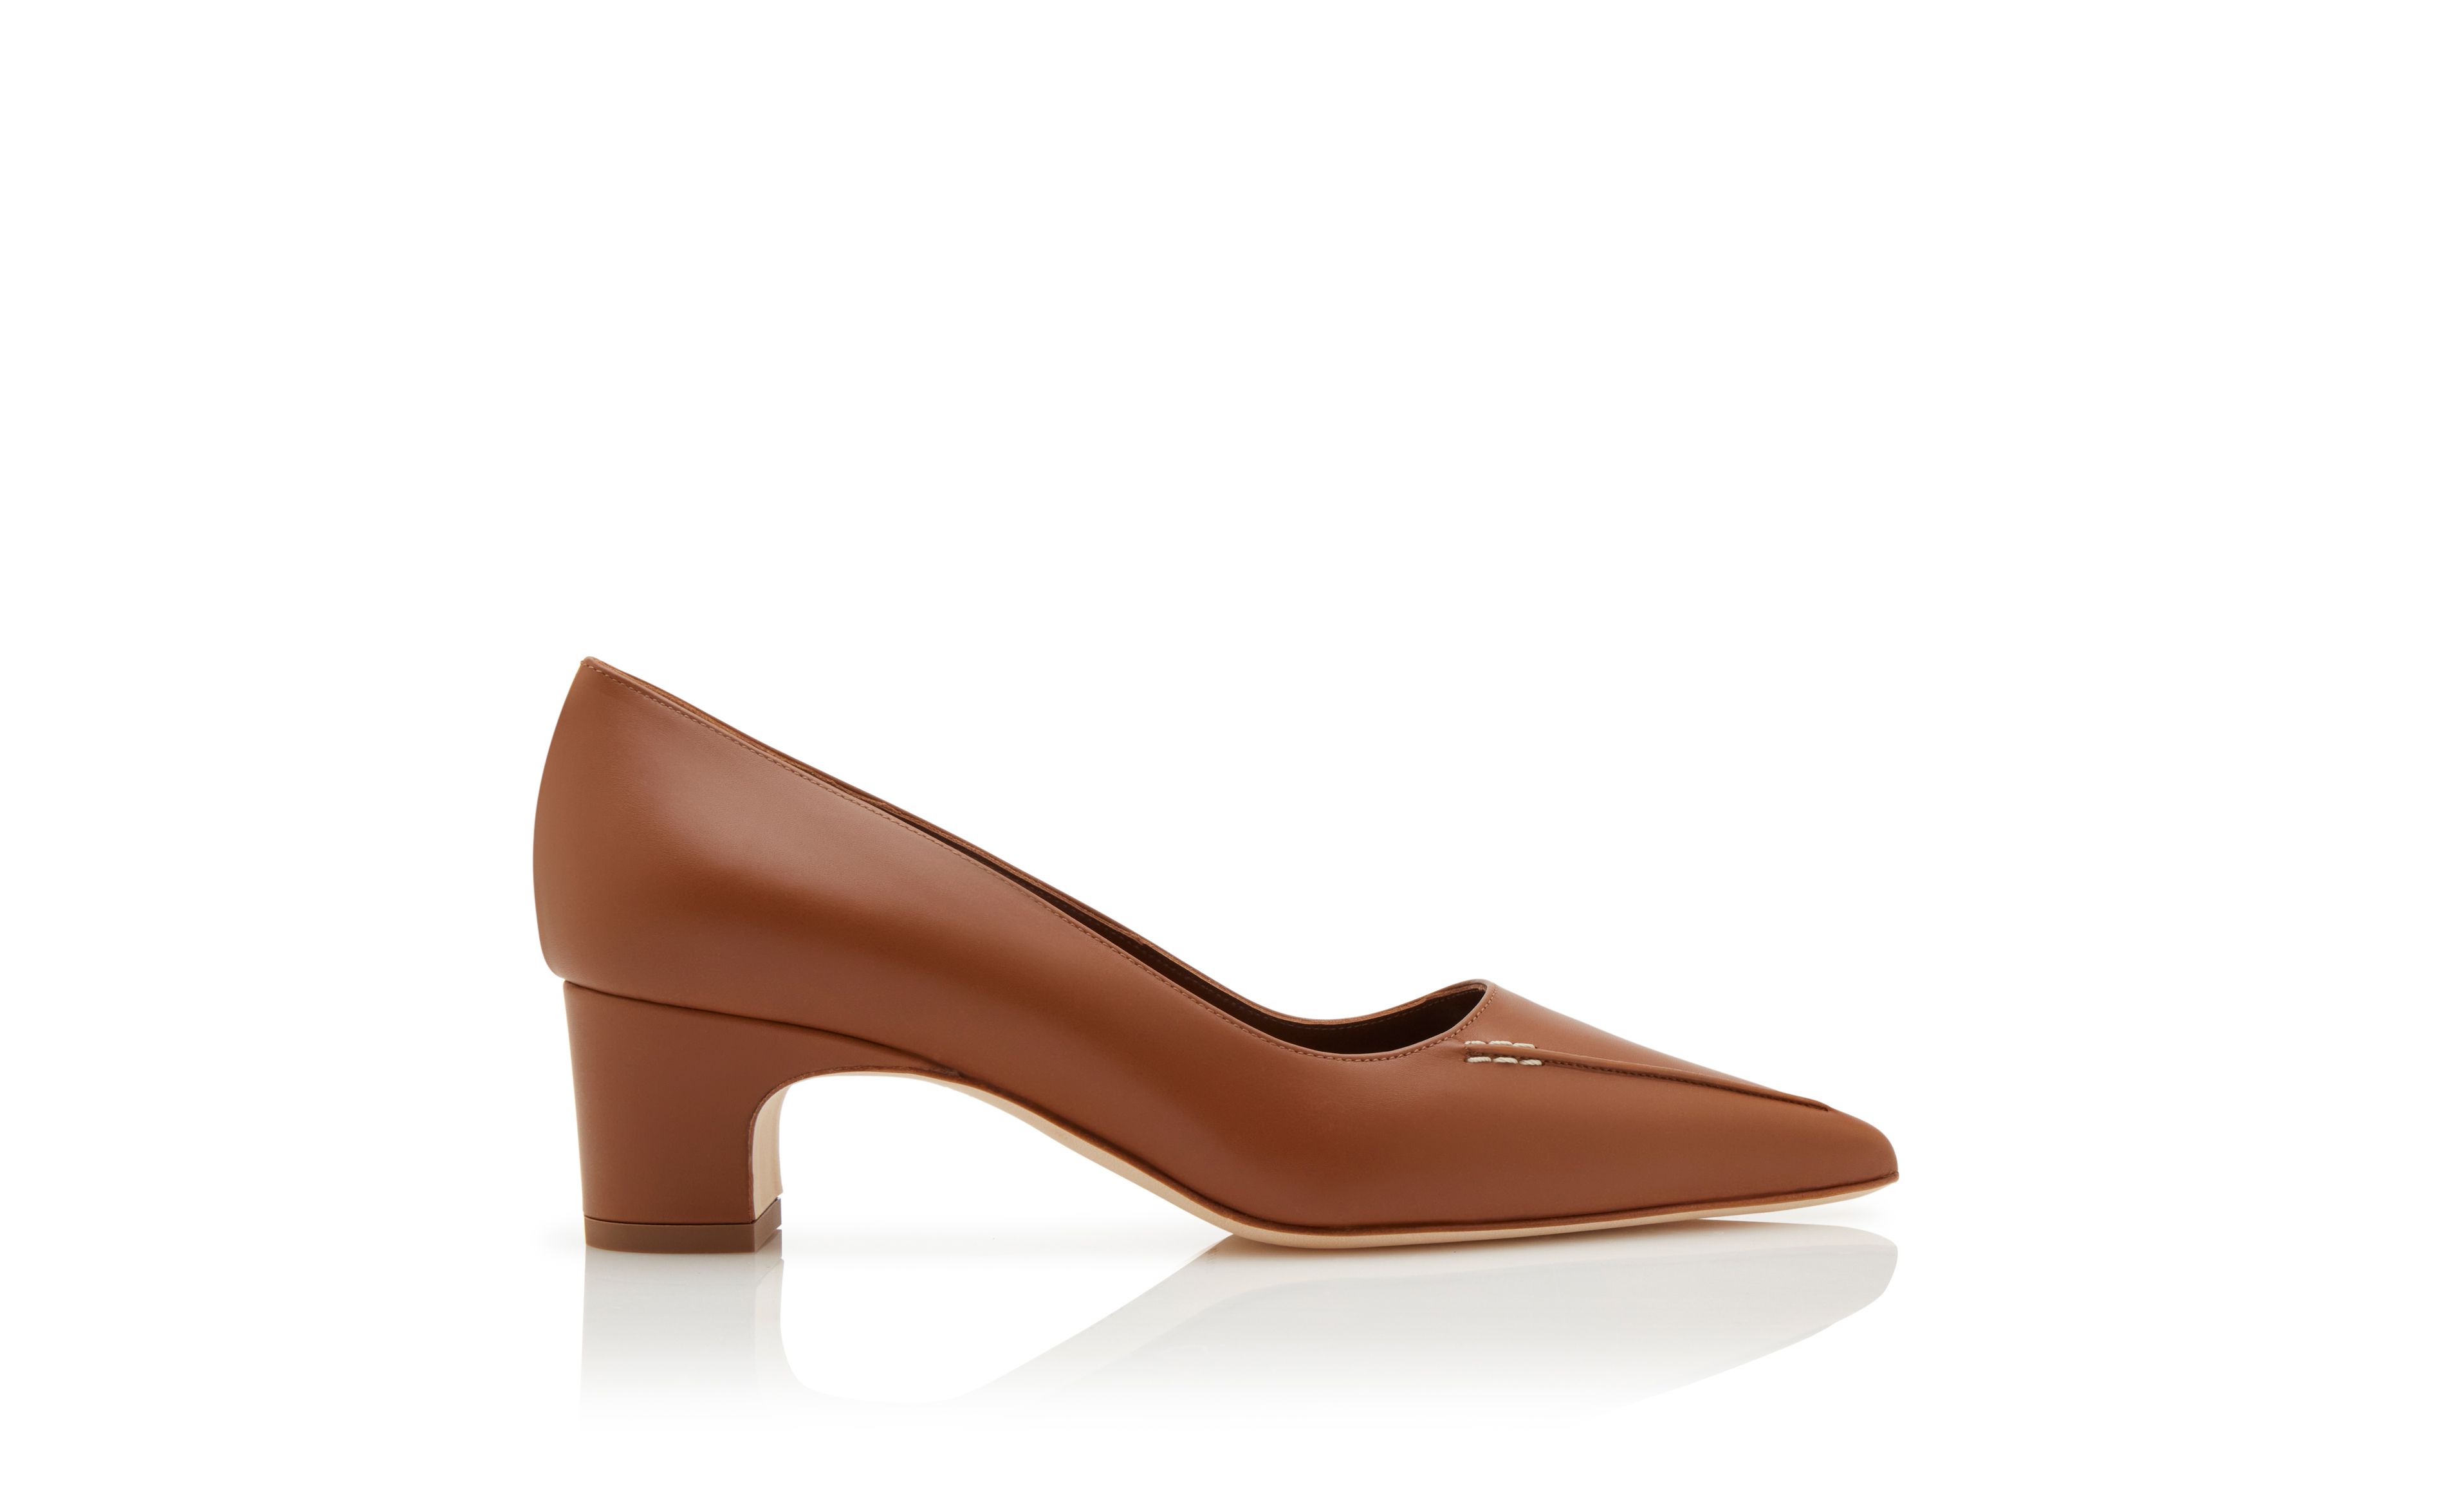 Designer Brown Calf Leather Pumps - Image Side View